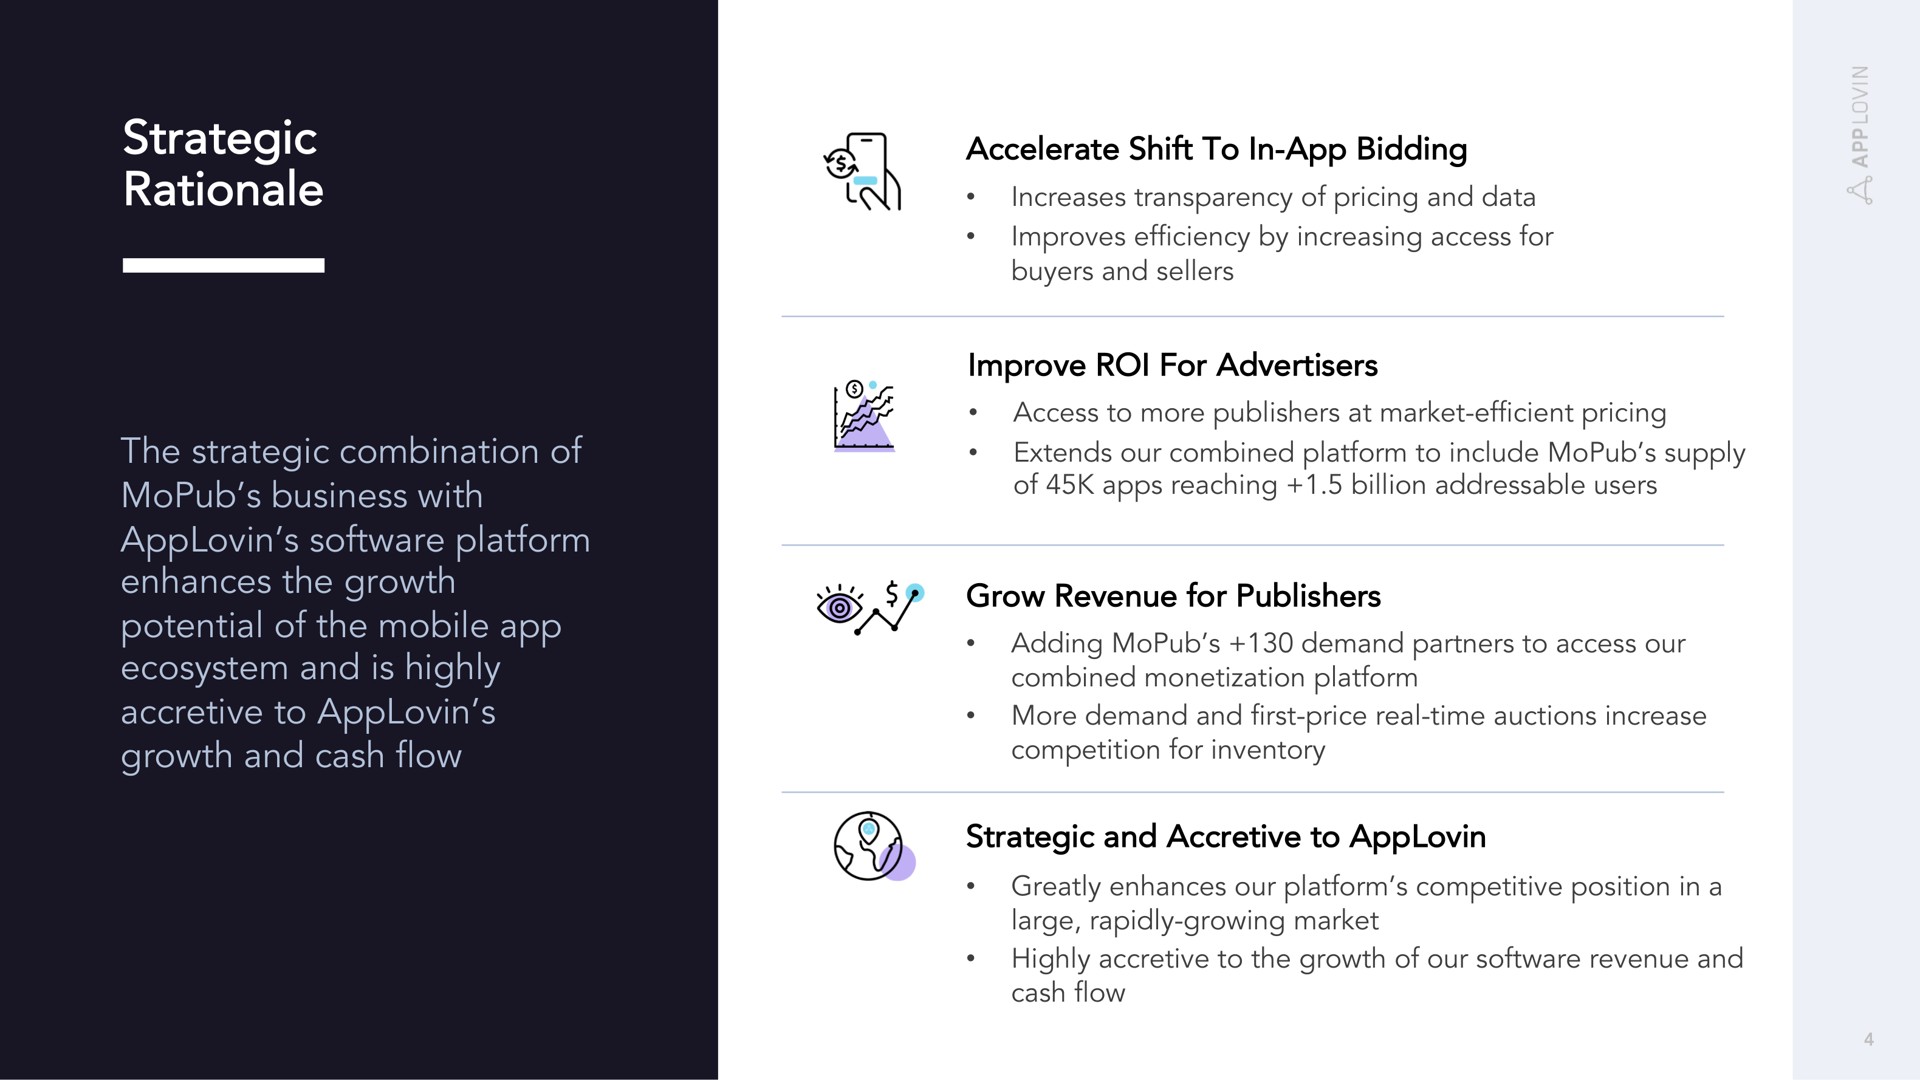 strategic rationale the strategic combination of business with platform enhances the growth potential of the mobile ecosystem and is highly accretive to growth and cash flow accelerate shift to in bidding improve roi for advertisers grow revenue for publishers strategic and accretive to | AppLovin